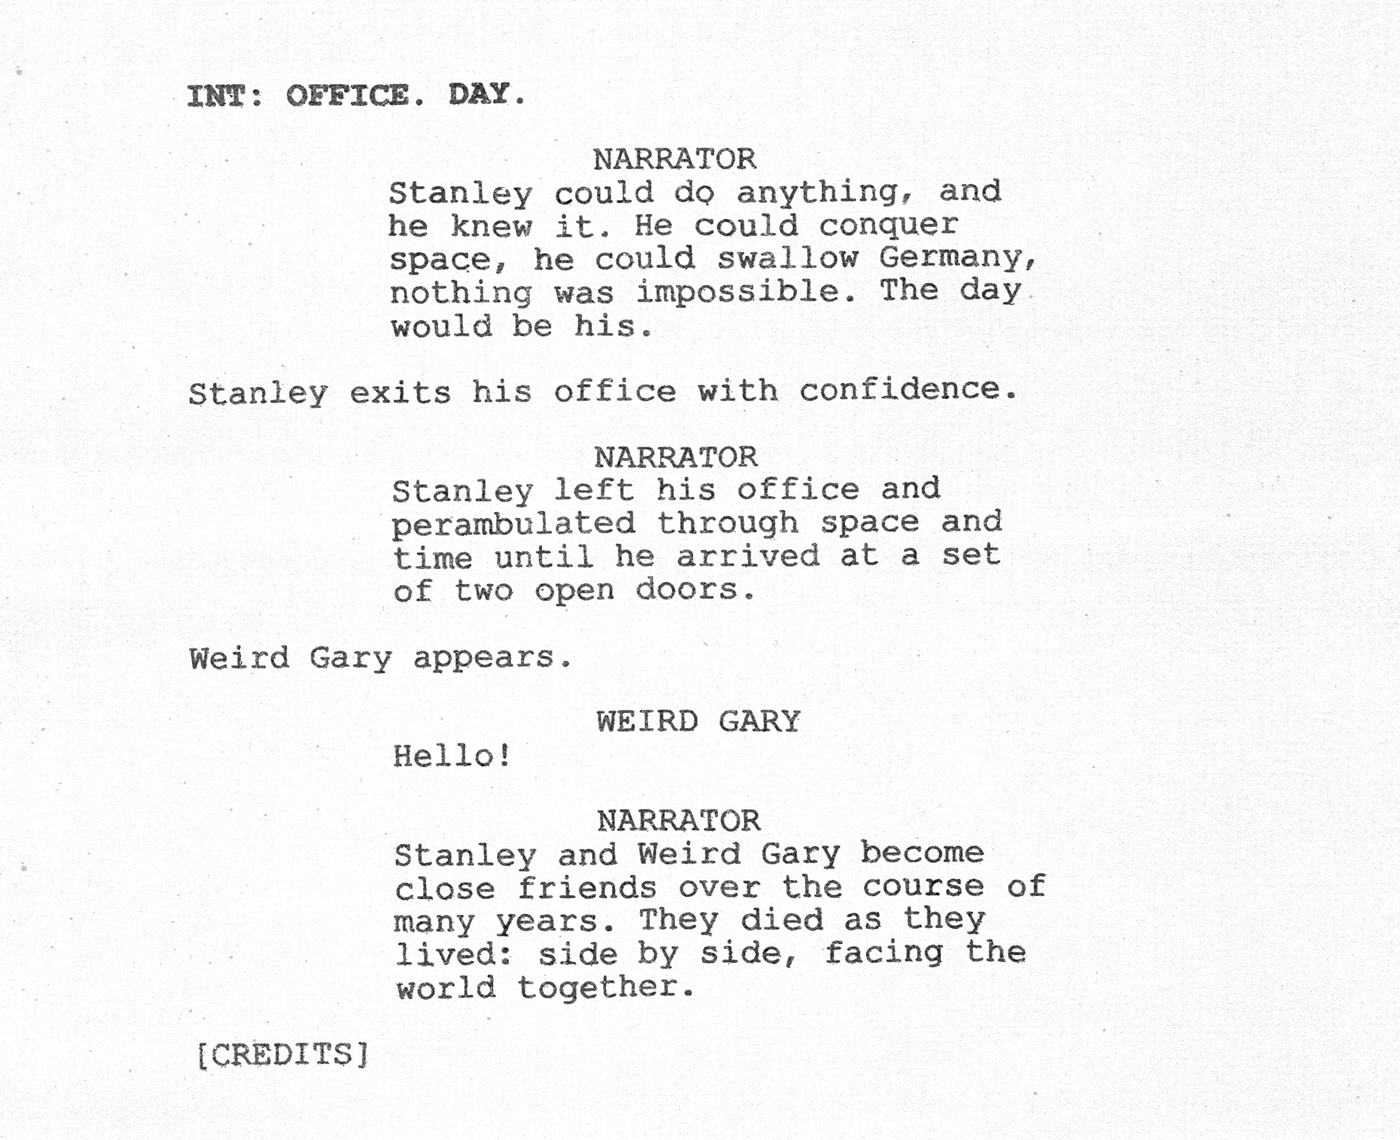 Scan of a script page. INT: Office. Day. Narrator: Stanley could do anything, and he knew it. He could conquer space, he could swallow Germany, nothing was impossible. The day would be his. [Stanley exits his office with confidence] Narrator: Stanley left his office and perambulated through space and time until he arrived at a set of two open doors. [Weird Gary appears] Weird Gary: Hello! Narrator: Stanley and Weird Gary become close friends over the course of many years. They died as they lived: side by side, facing the world together. [credits]